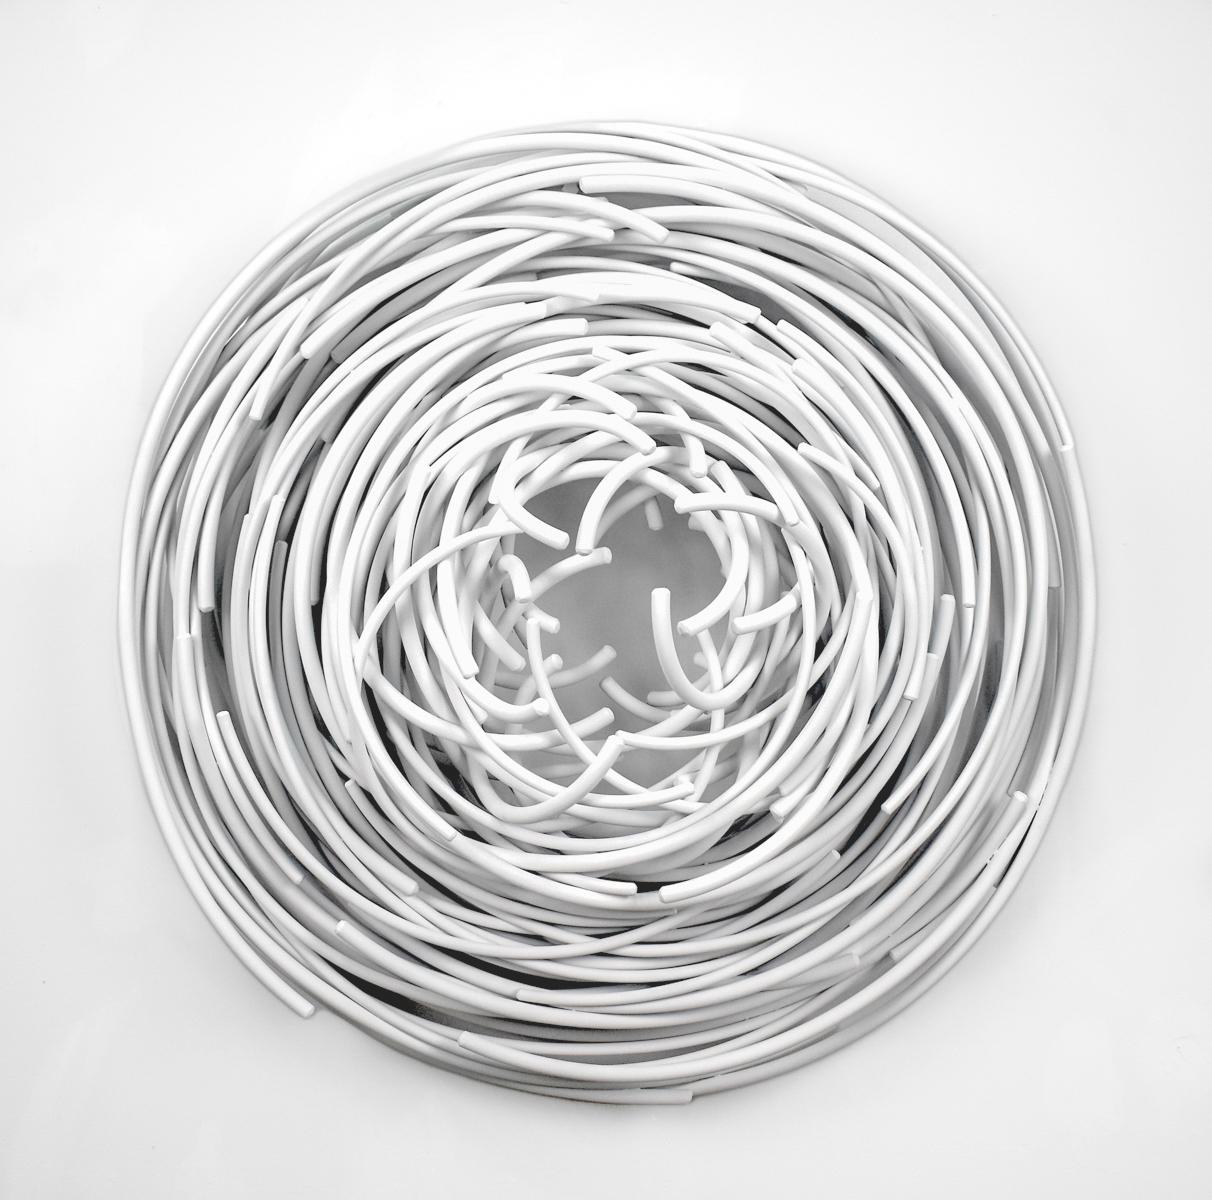 Shayne Dark Abstract Sculpture - Maelstrom Series No 6 - layered, intersecting, forged aluminum wall sculpture